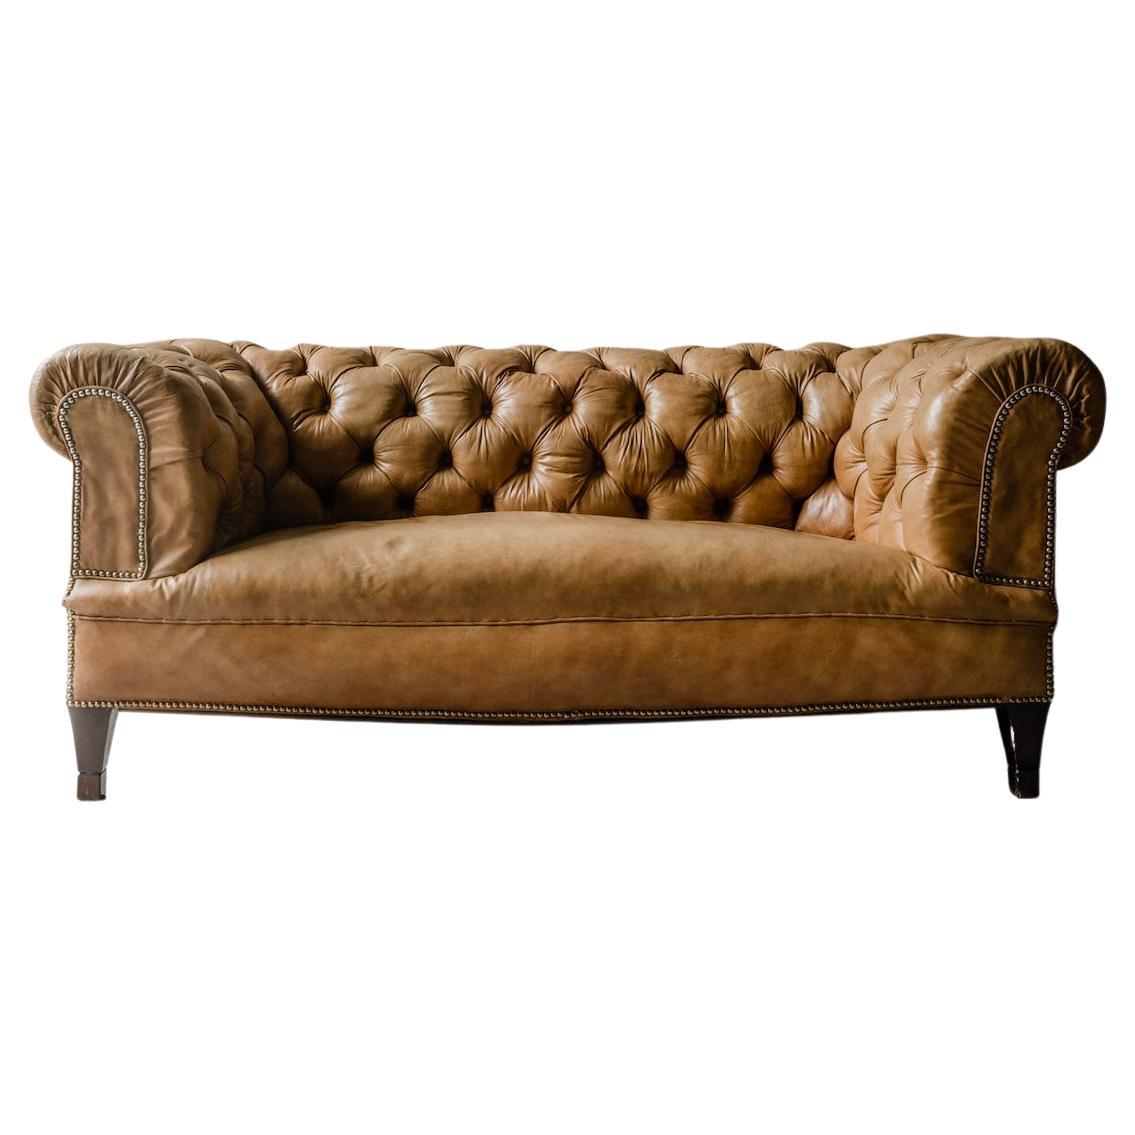 Vintage Leather Chesterfield Sofa from Denmark, Circa 1950